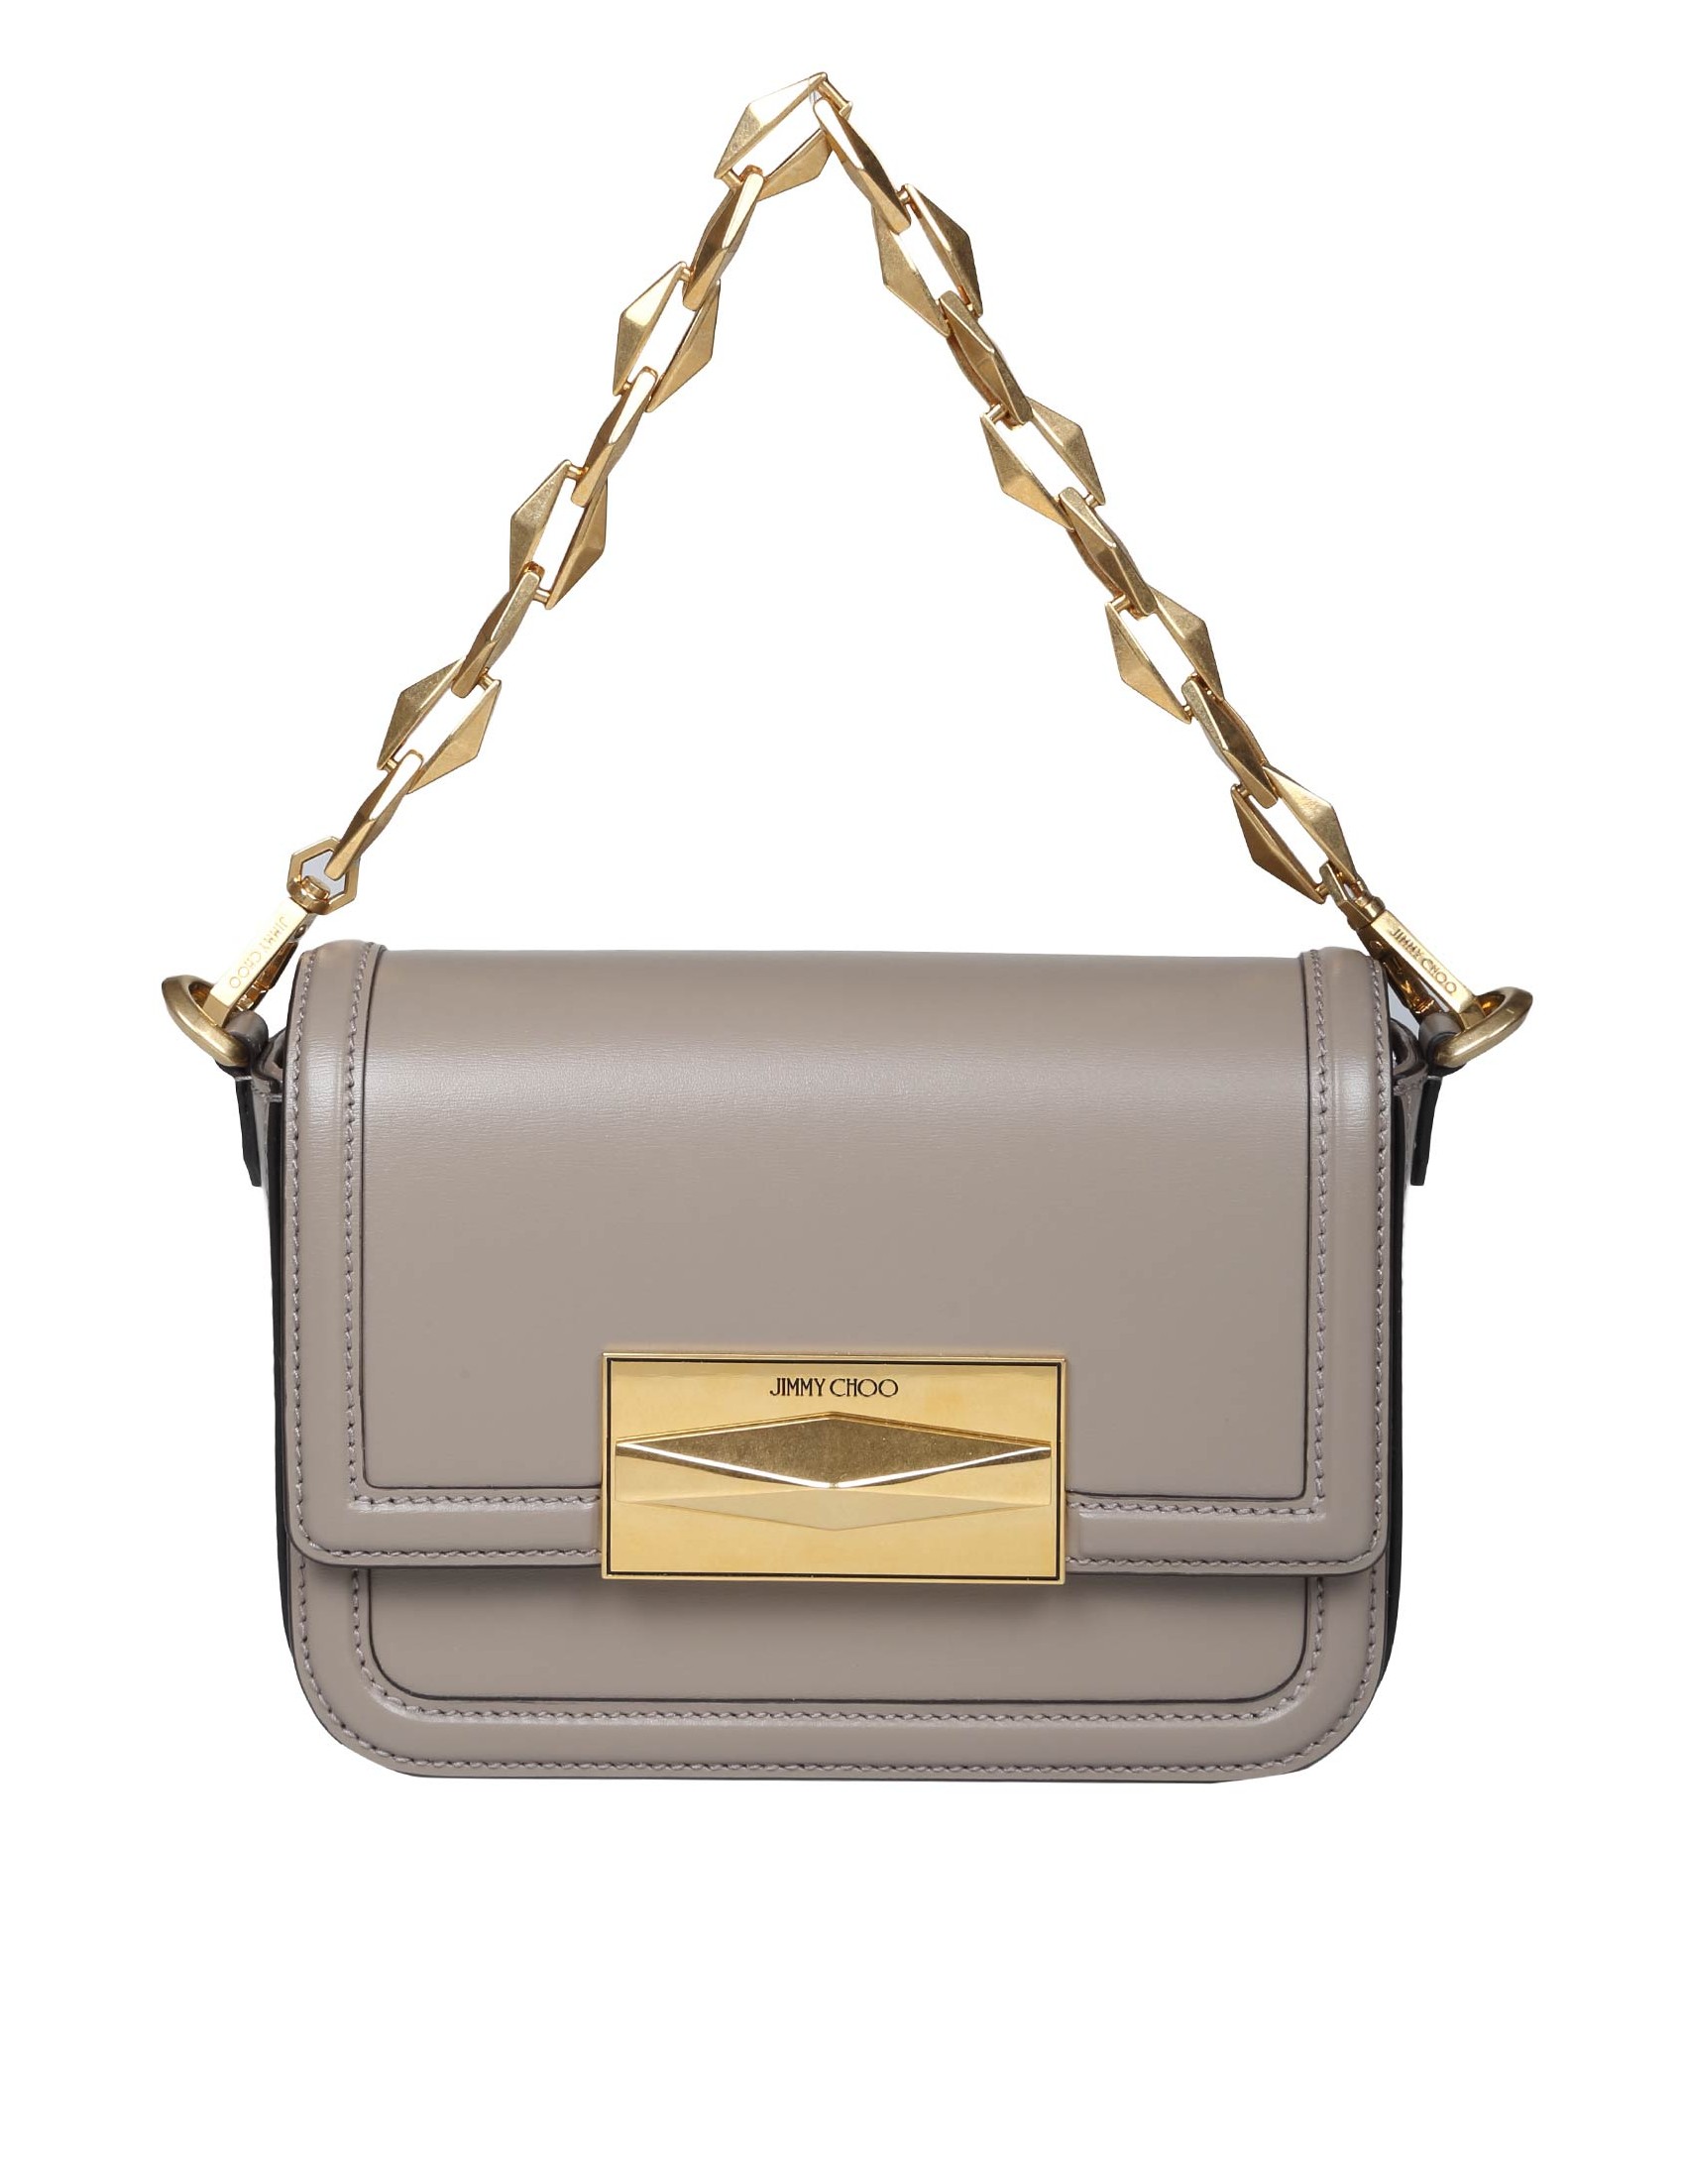 JIMMY CHOO DIAMOND CROSSBODY BAG IN TAUPE COLOR LEATHER